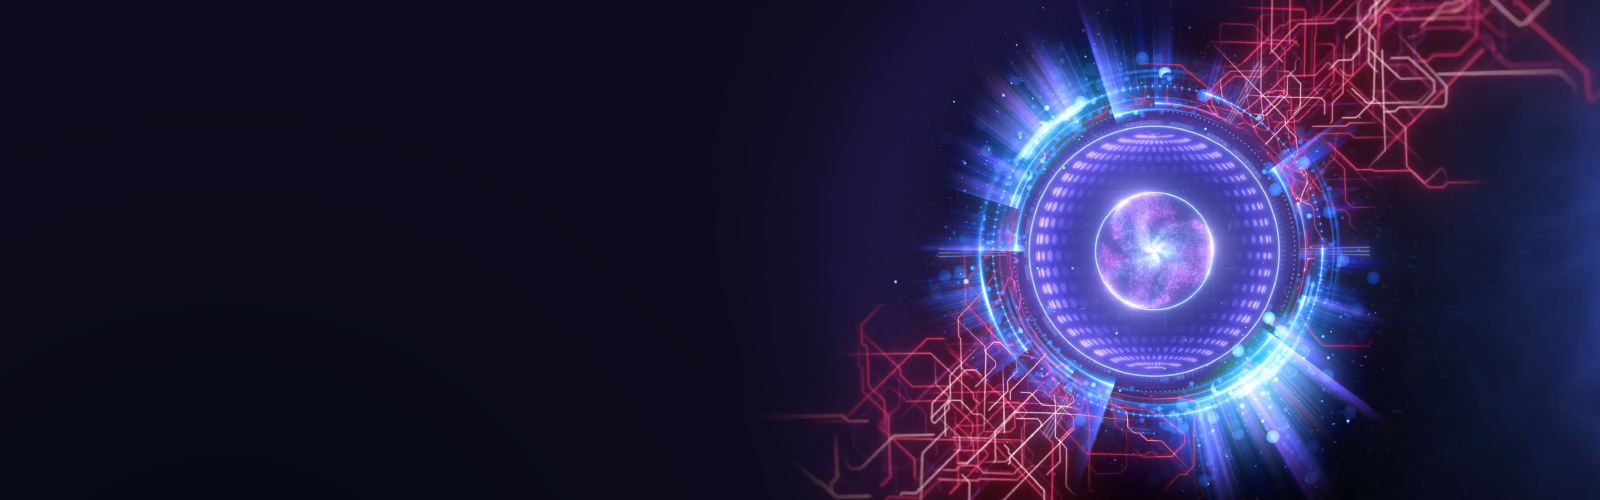 Dark banner with purple glowing orb surrounded by abstract blue circles and red lines